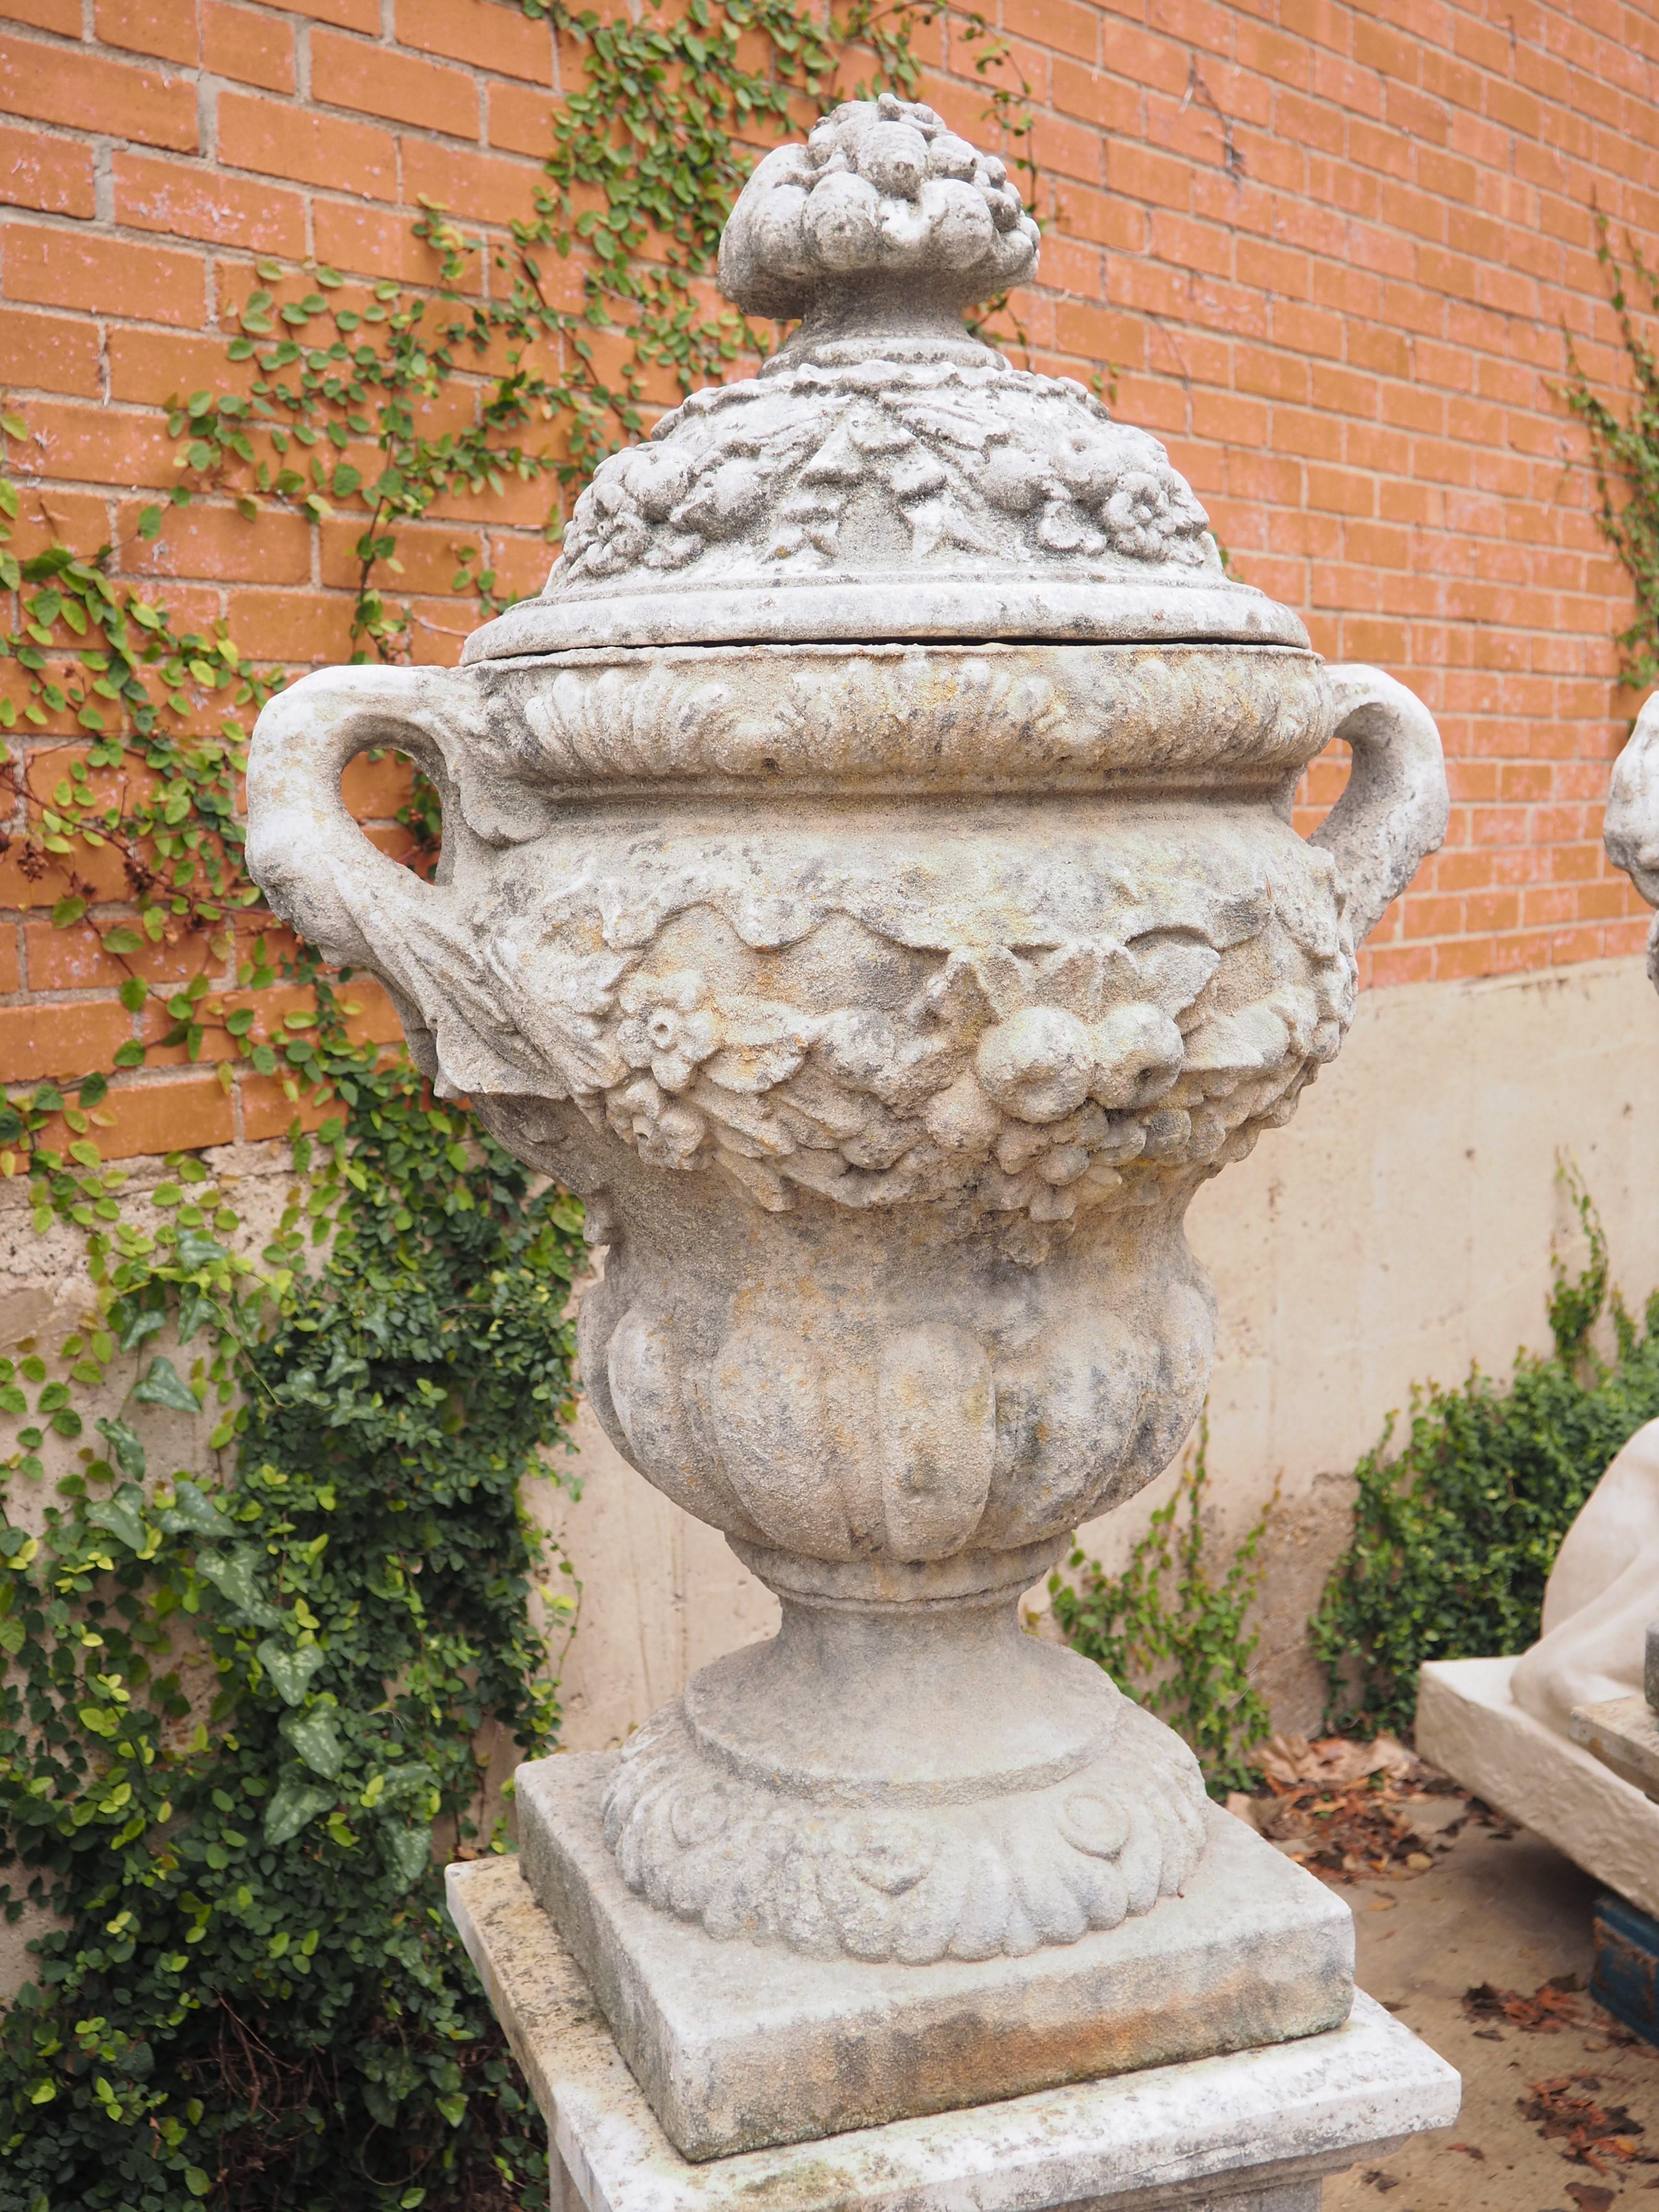 French Pair of Lidded Garden Vases on Pedestals from Normandy, France